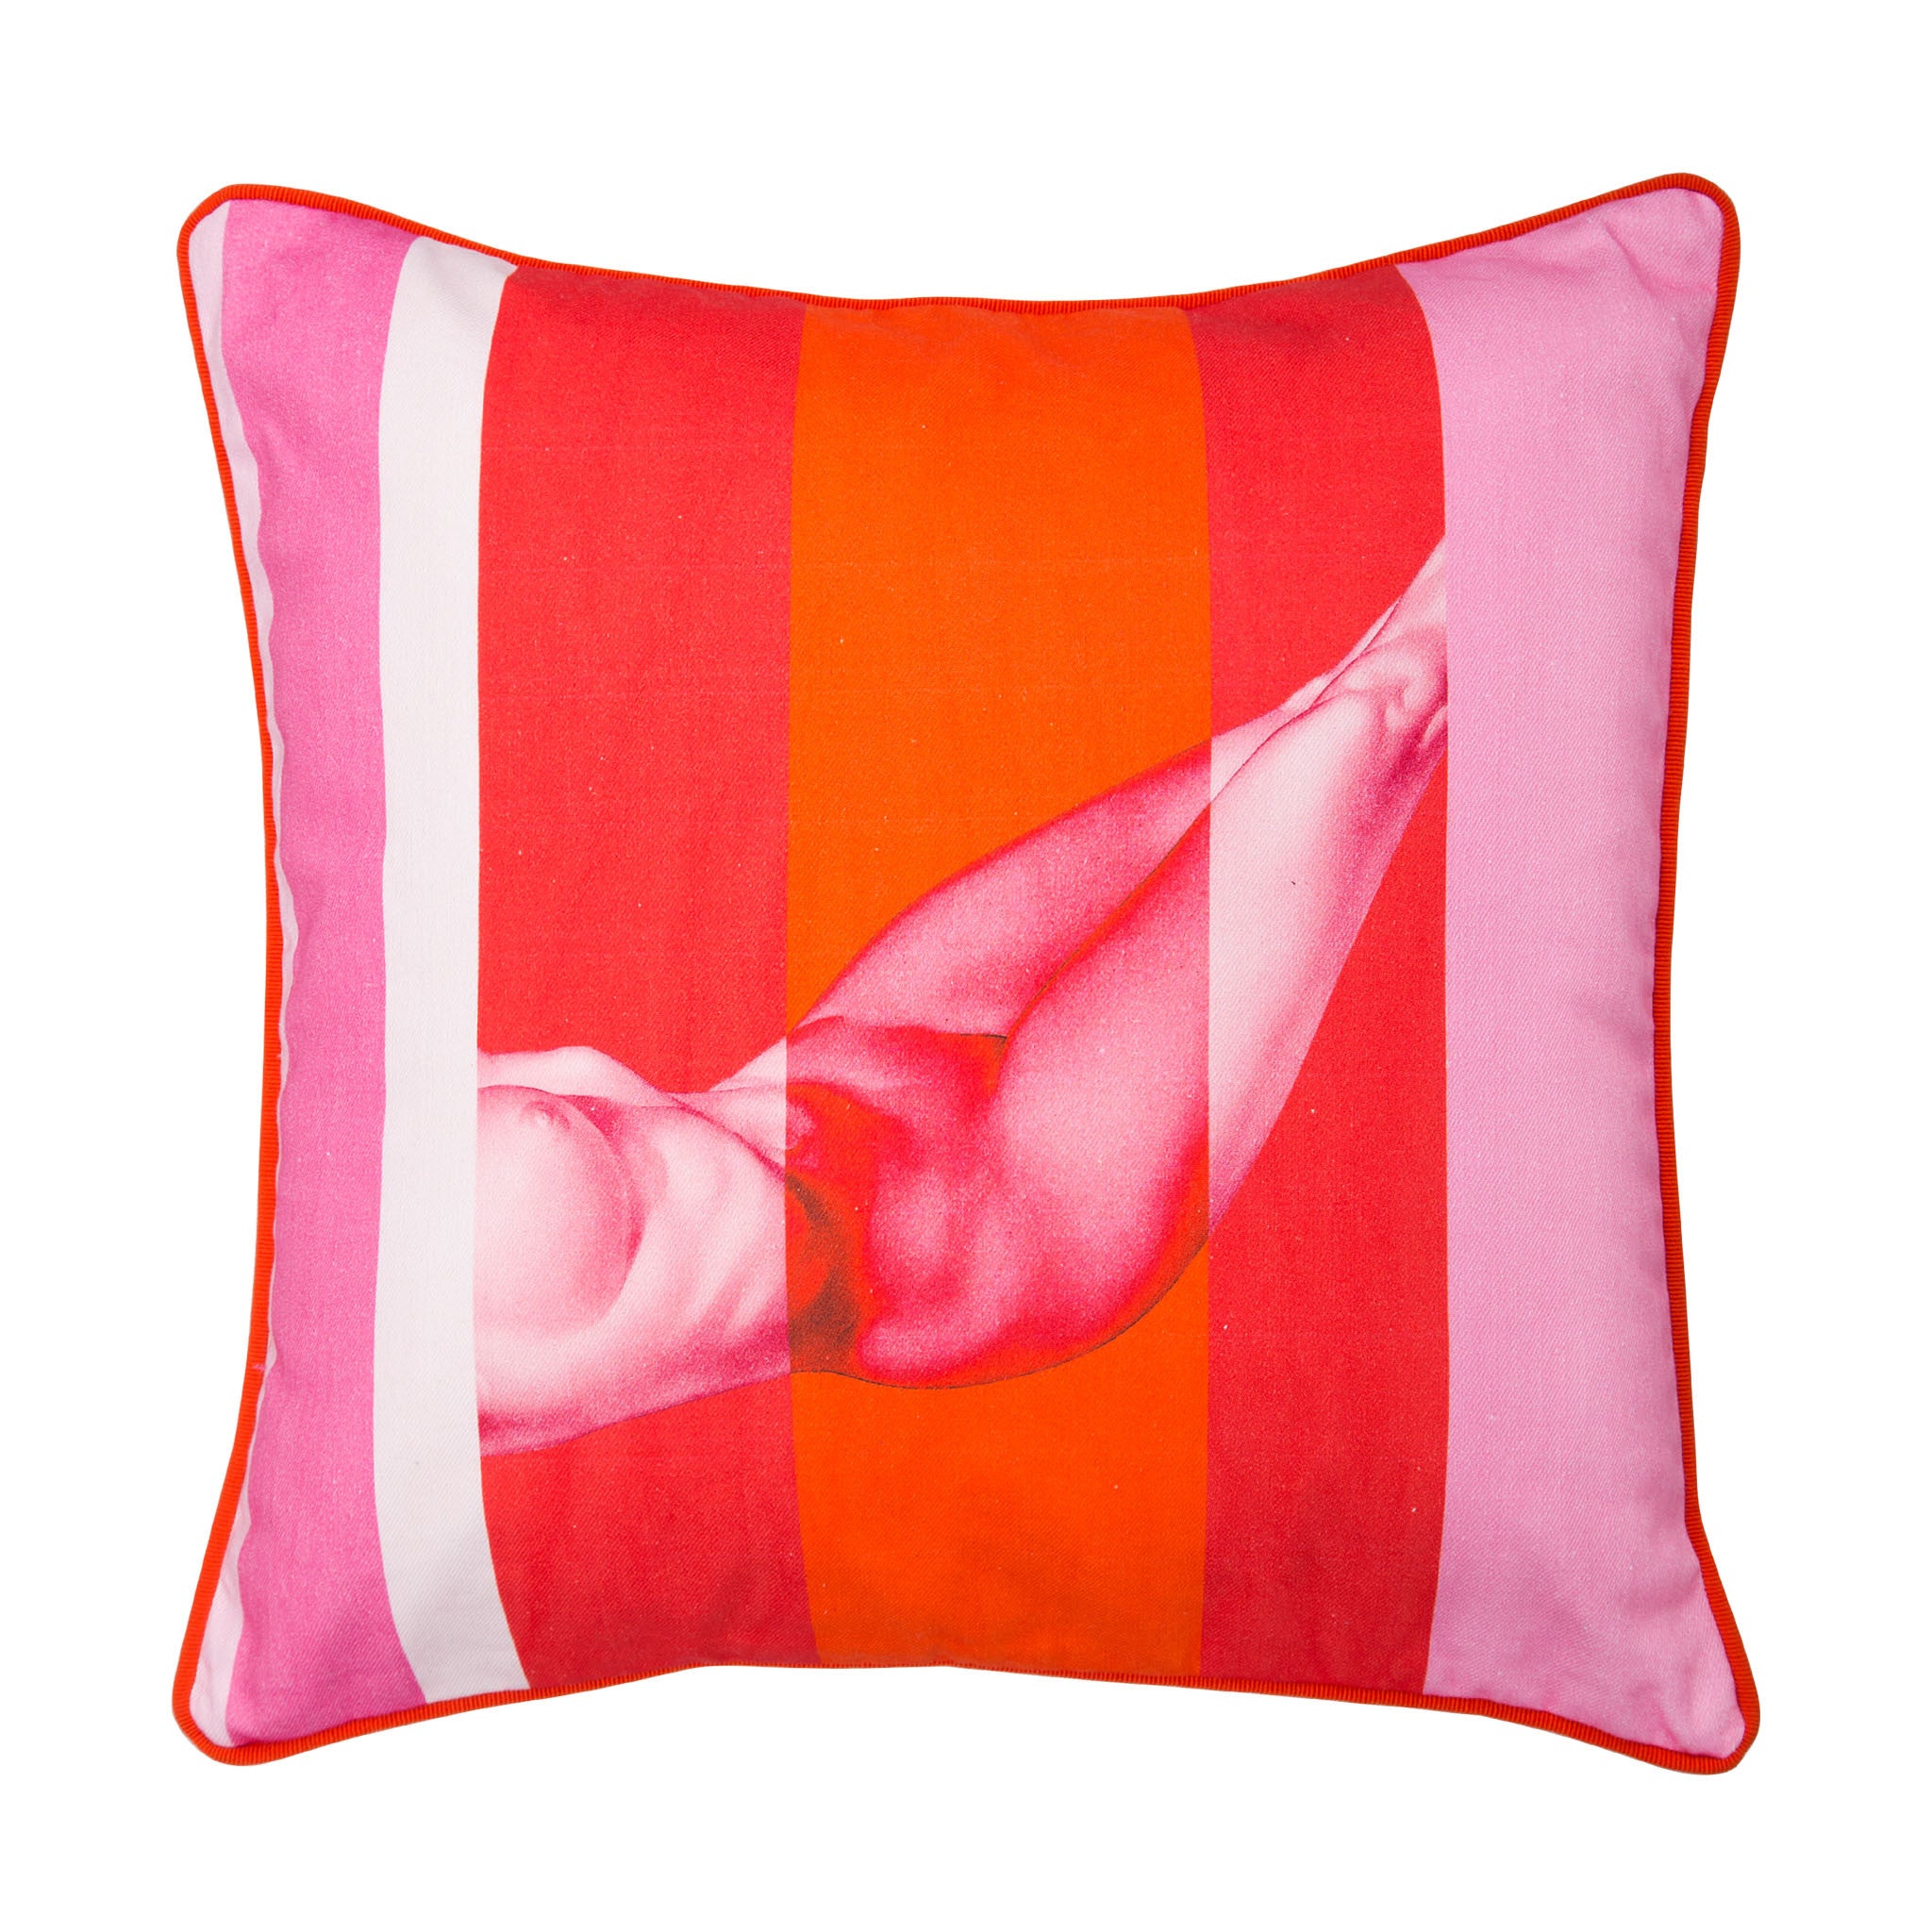 Cotton red & pink reclining nude print cushion - Bivain - 1